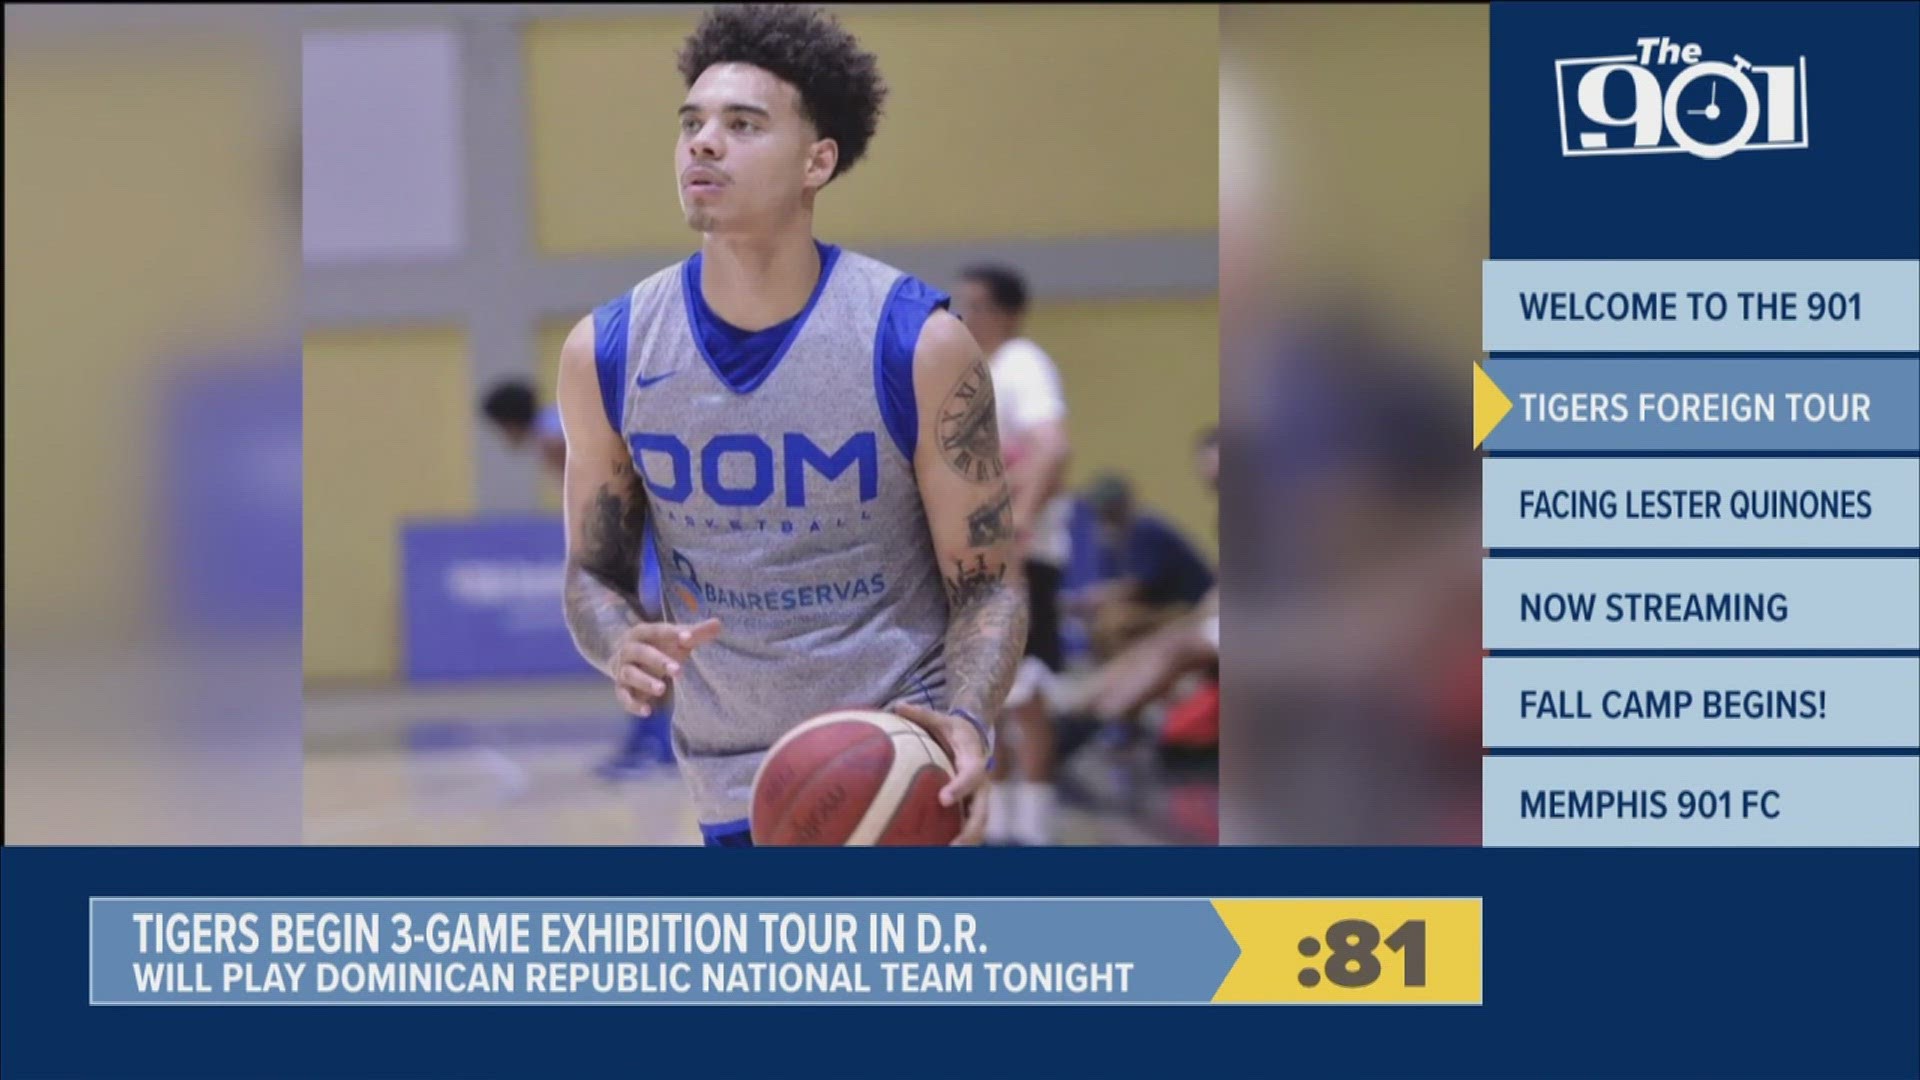 Memphis Tigers head to the Dominican Republic to face off against a familiar face The 901 localmemphis